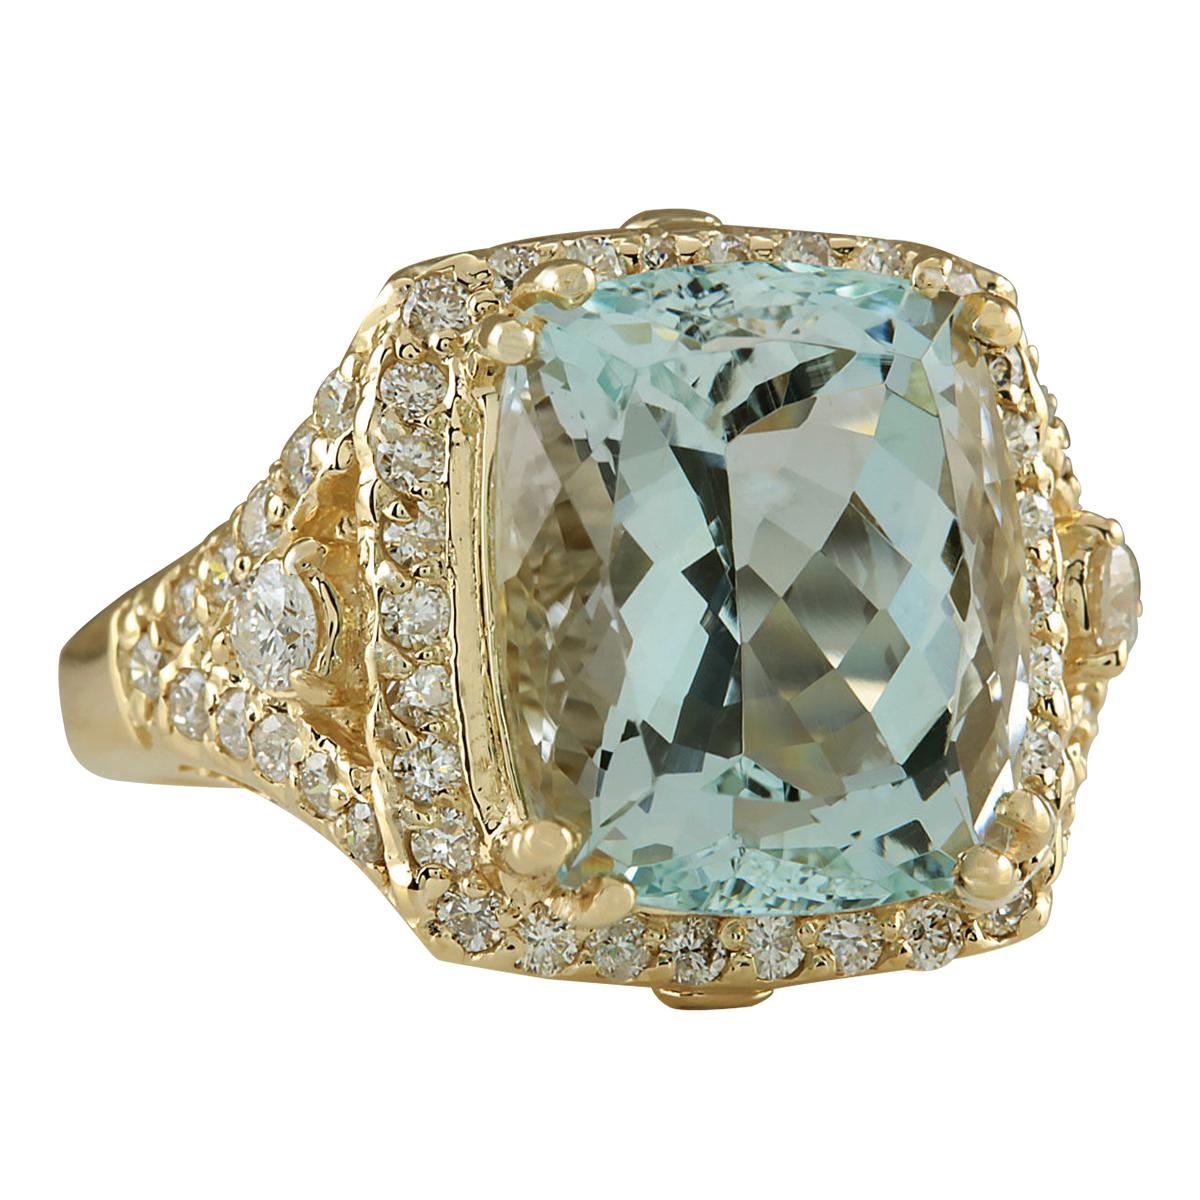 Stamped: 18K Yellow Gold
Total Ring Weight: 7.5 Grams
Ring Length: N/A
Ring Width: N/A
Gemstone Weight: Total Natural Aquamarine Weight is 8.03 Carat (Measures: 13.05x11.03 mm)
Color: Blue
Diamond Weight: Total Natural Diamond Weight is 1.00